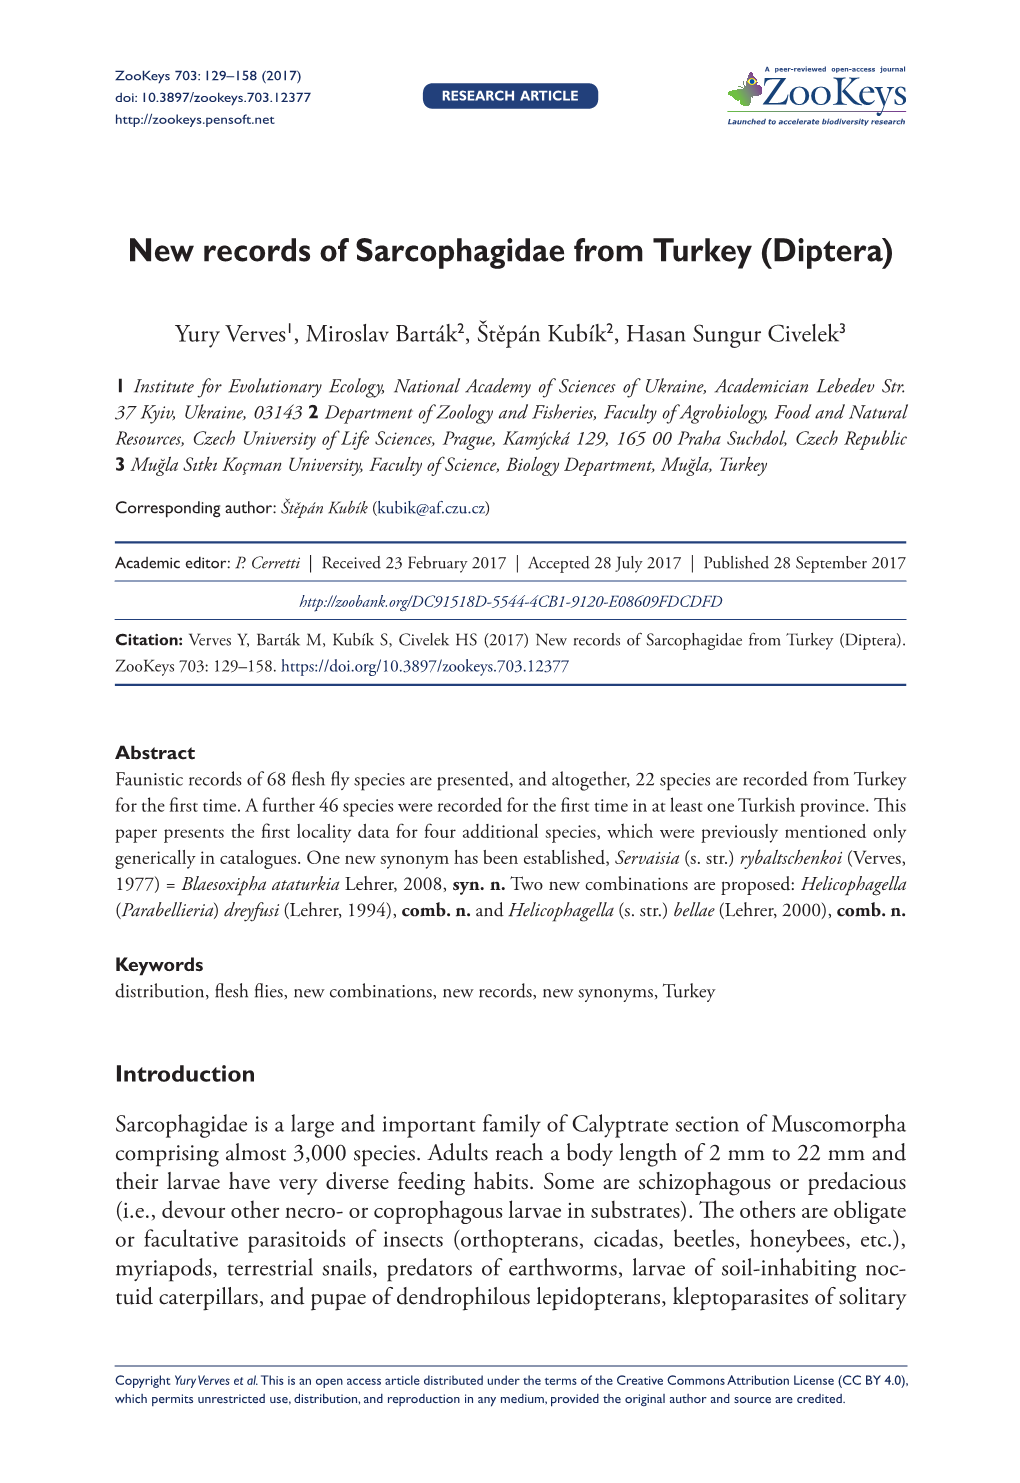 New Records of Sarcophagidae from Turkey (Diptera)